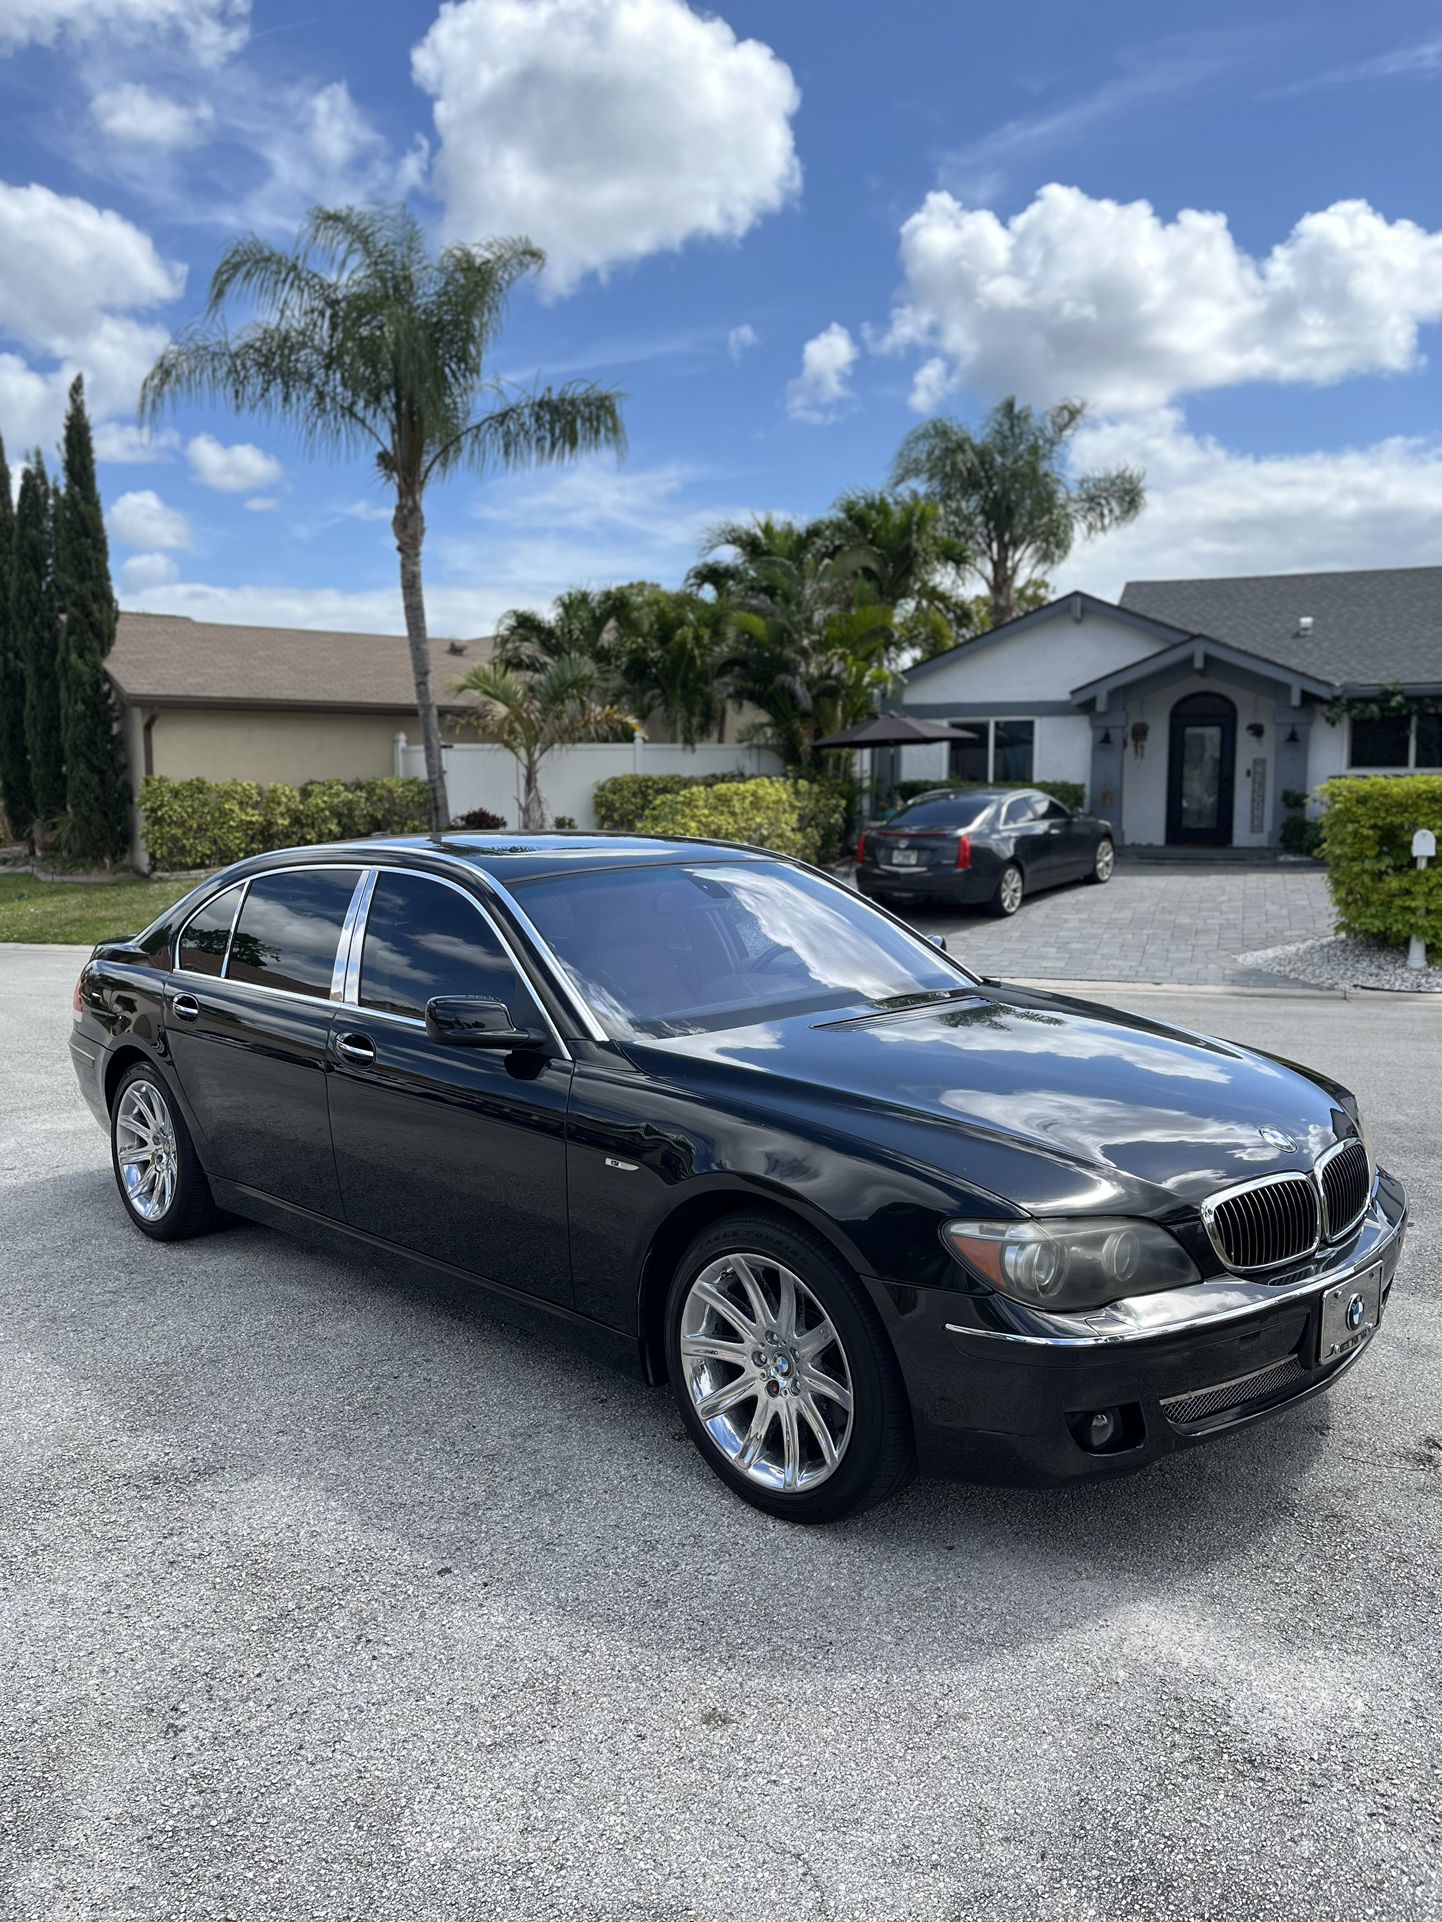 BMW 750i Clean Title In Hand Great Clean Conditions Ready To Go